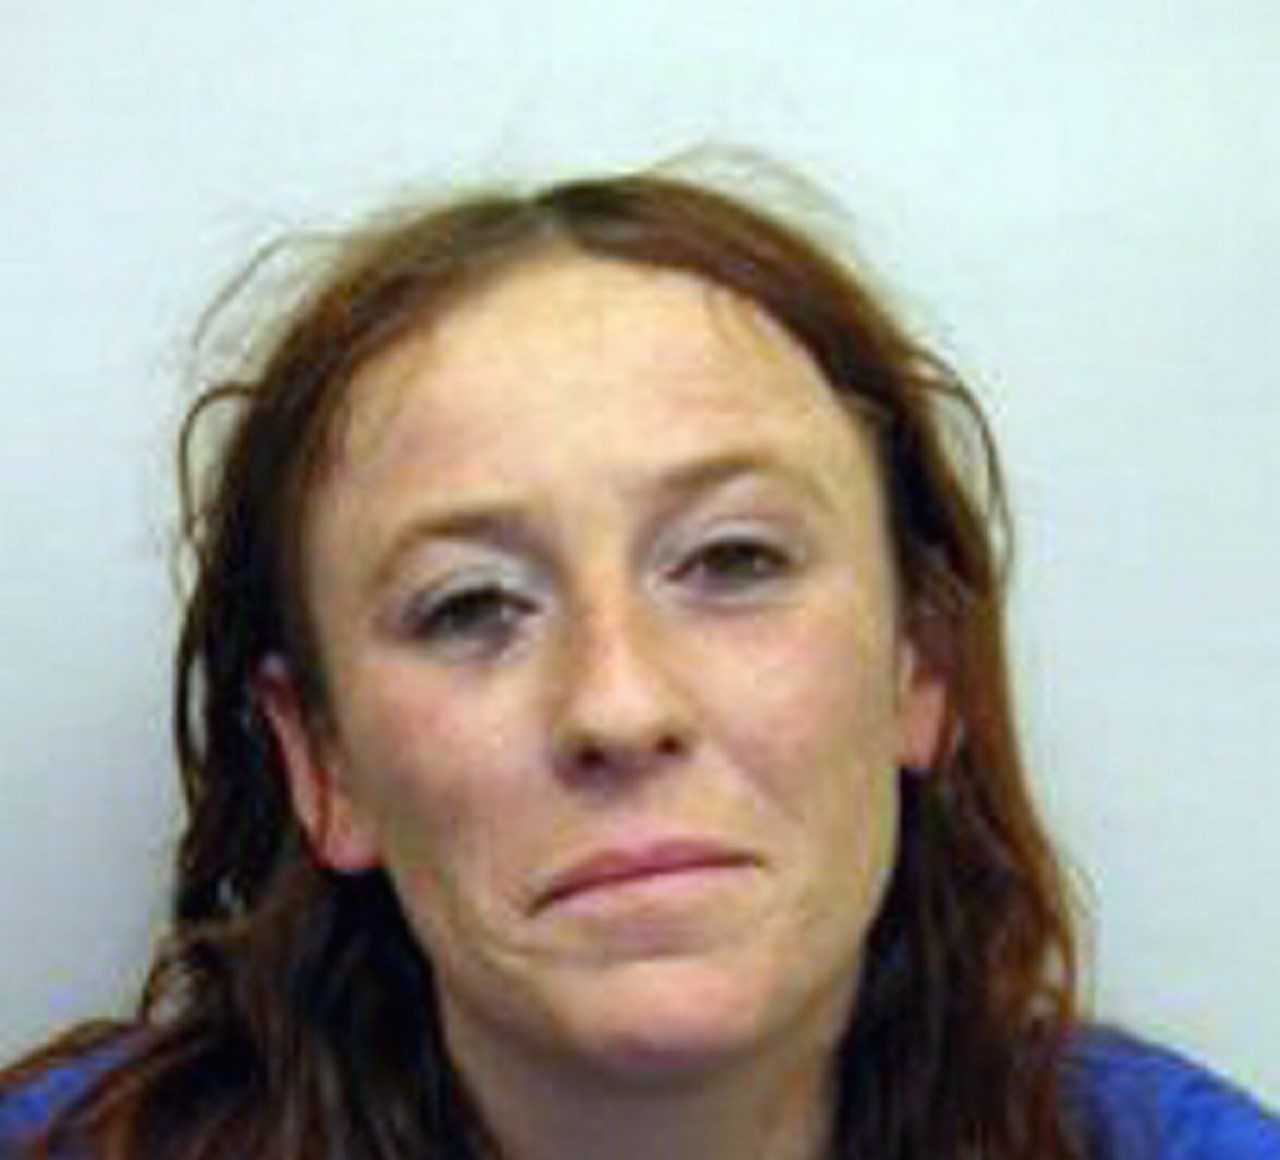 Kerry Rooney from Barrow pleaded guilty to possessing crack cocaine The Mail